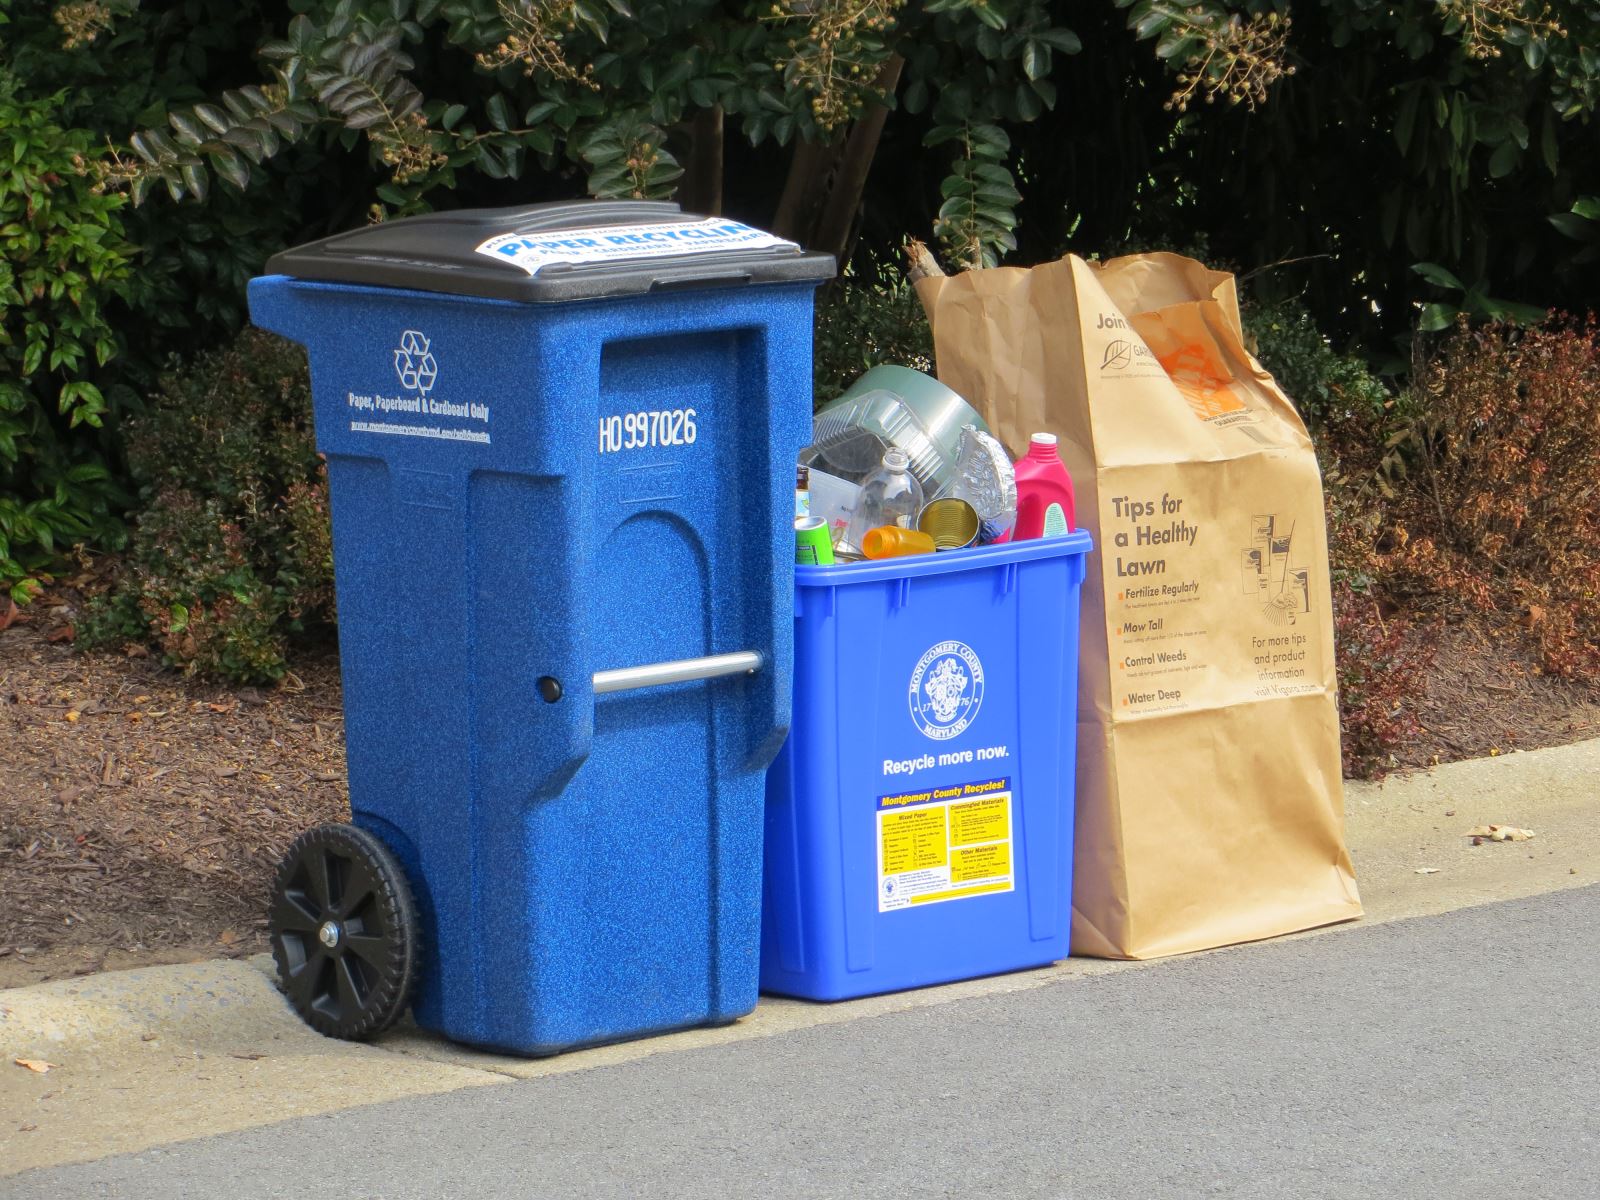 mixed paper and card board recycling cart, 22-gallon blue recycling bin, and yard waste in paper yard waste bag